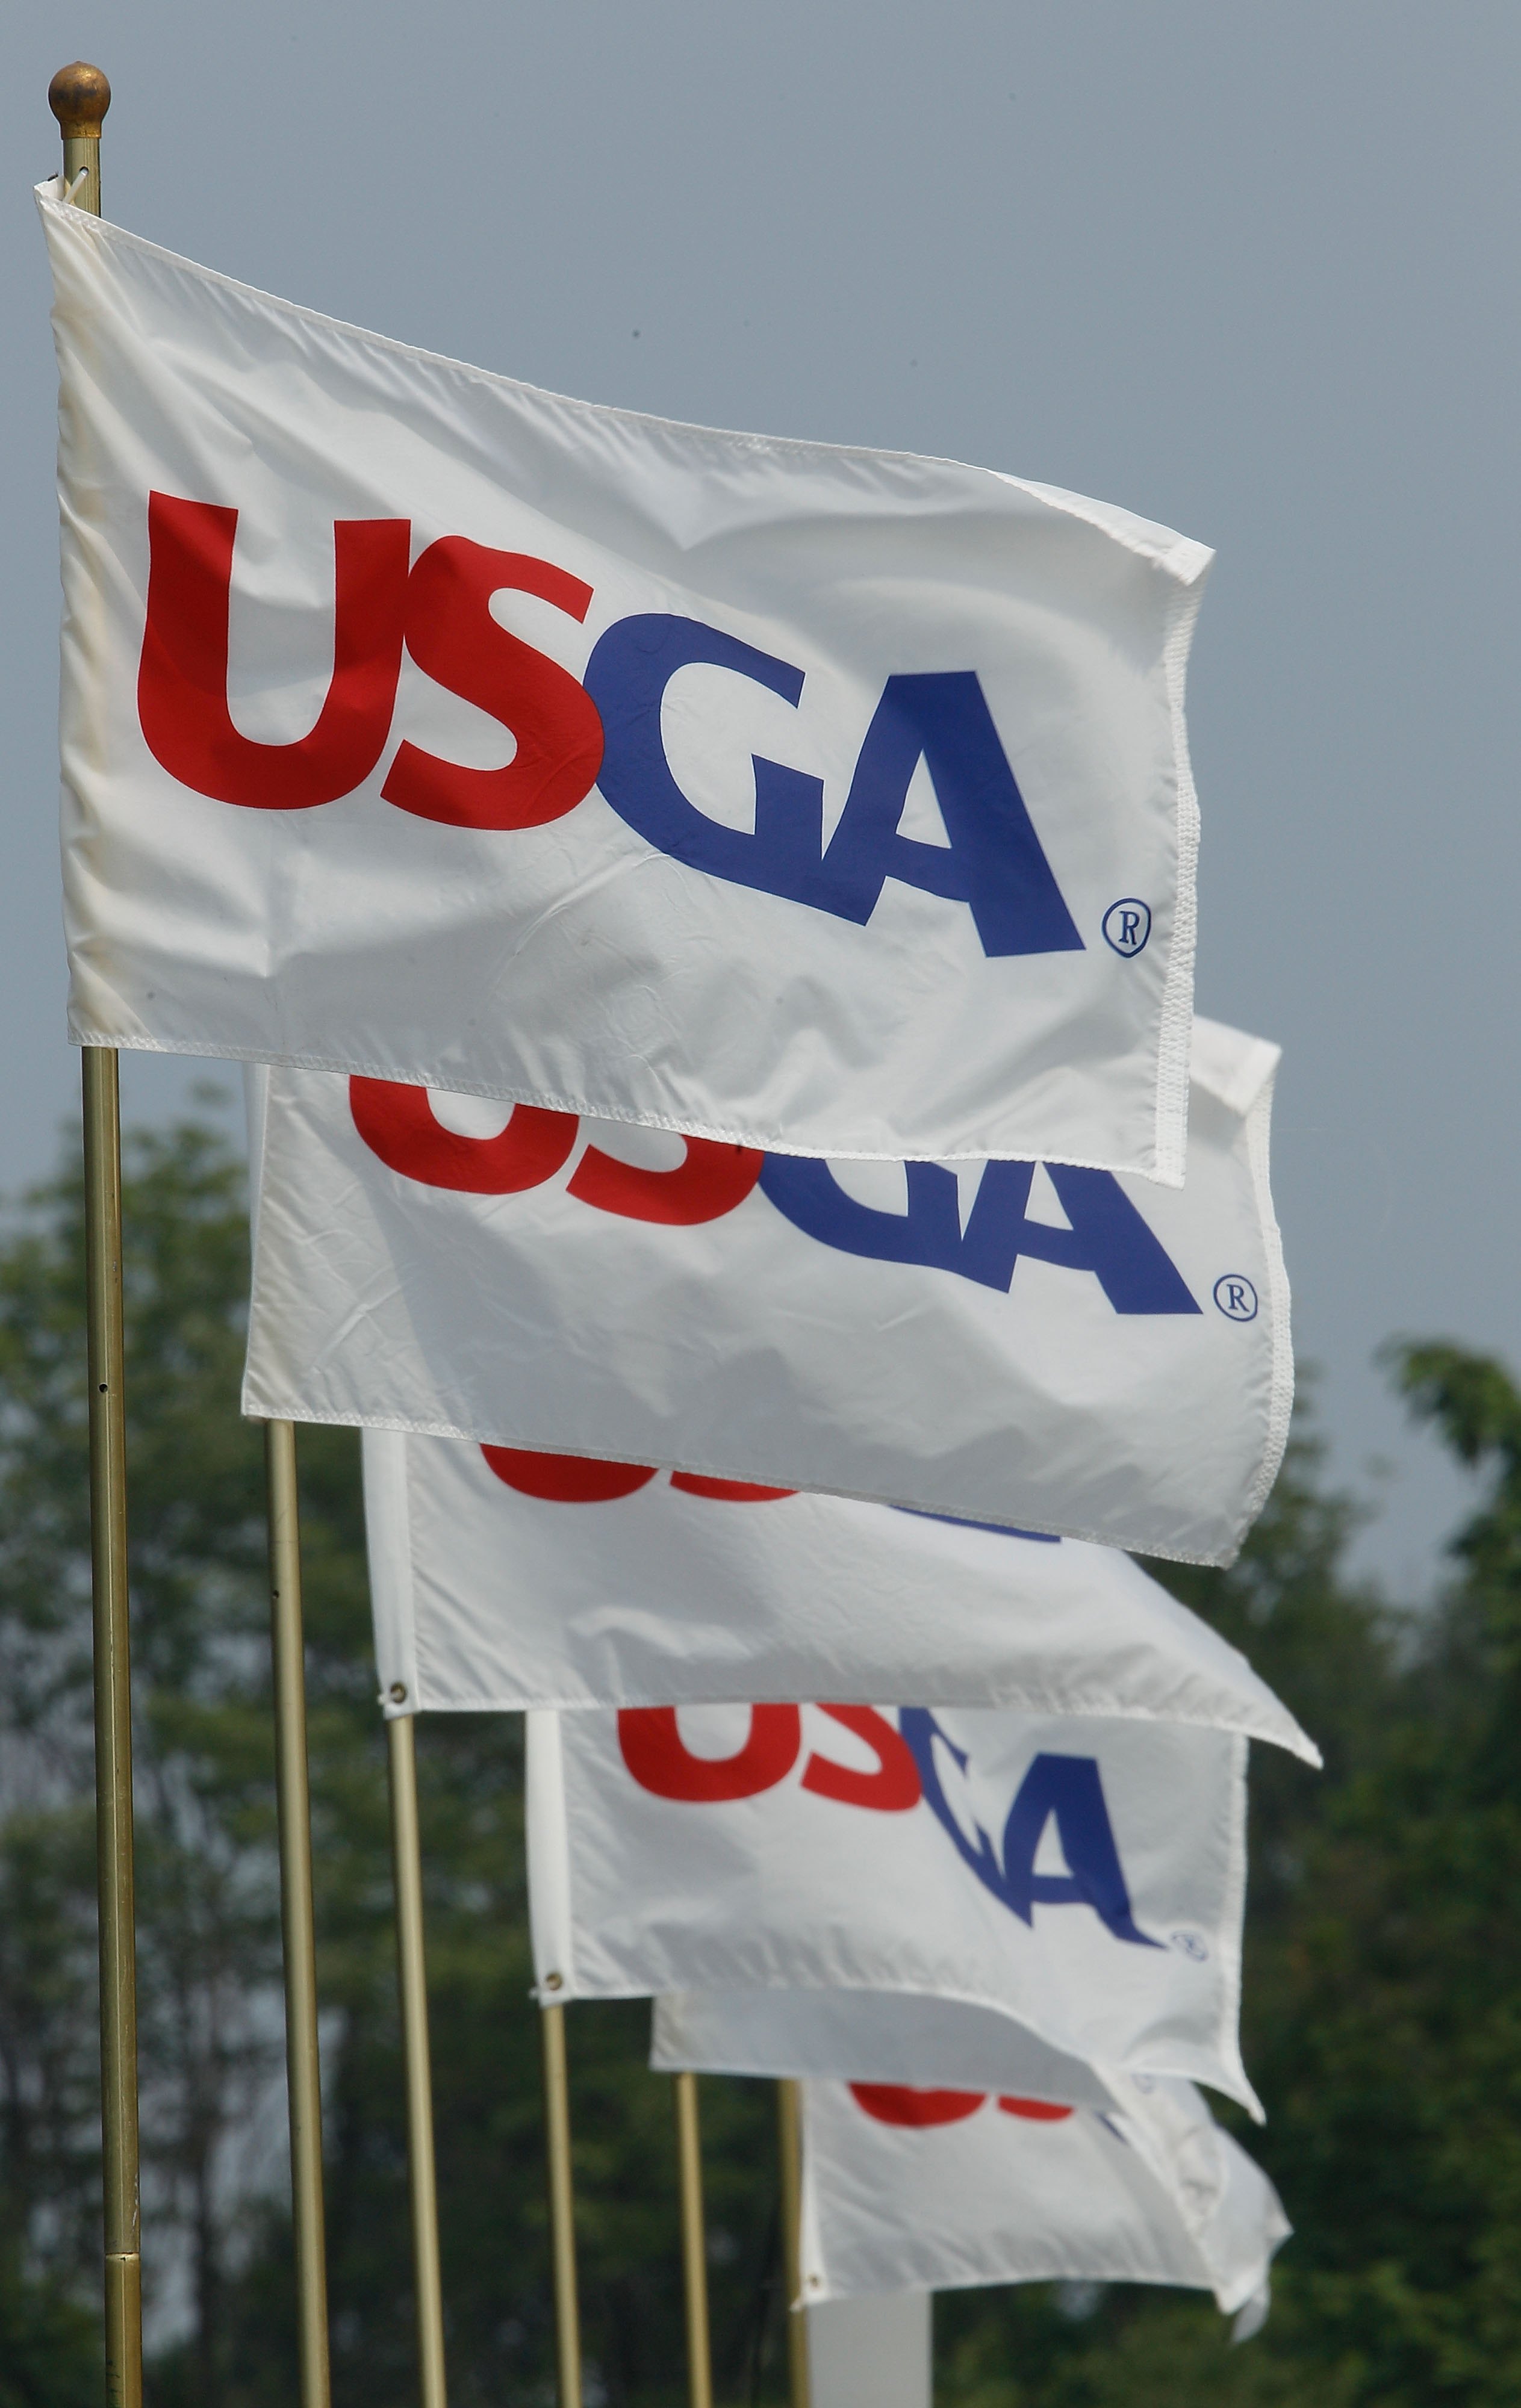 OAKMONT, PA - JULY 09:  USGA flags are seen during the second round of the 2010 U.S. Women's Open at Oakmont Country Club  on July 9, 2010 in Oakmont, Pennsylvania.  (Photo by Scott Halleran/Getty Images)